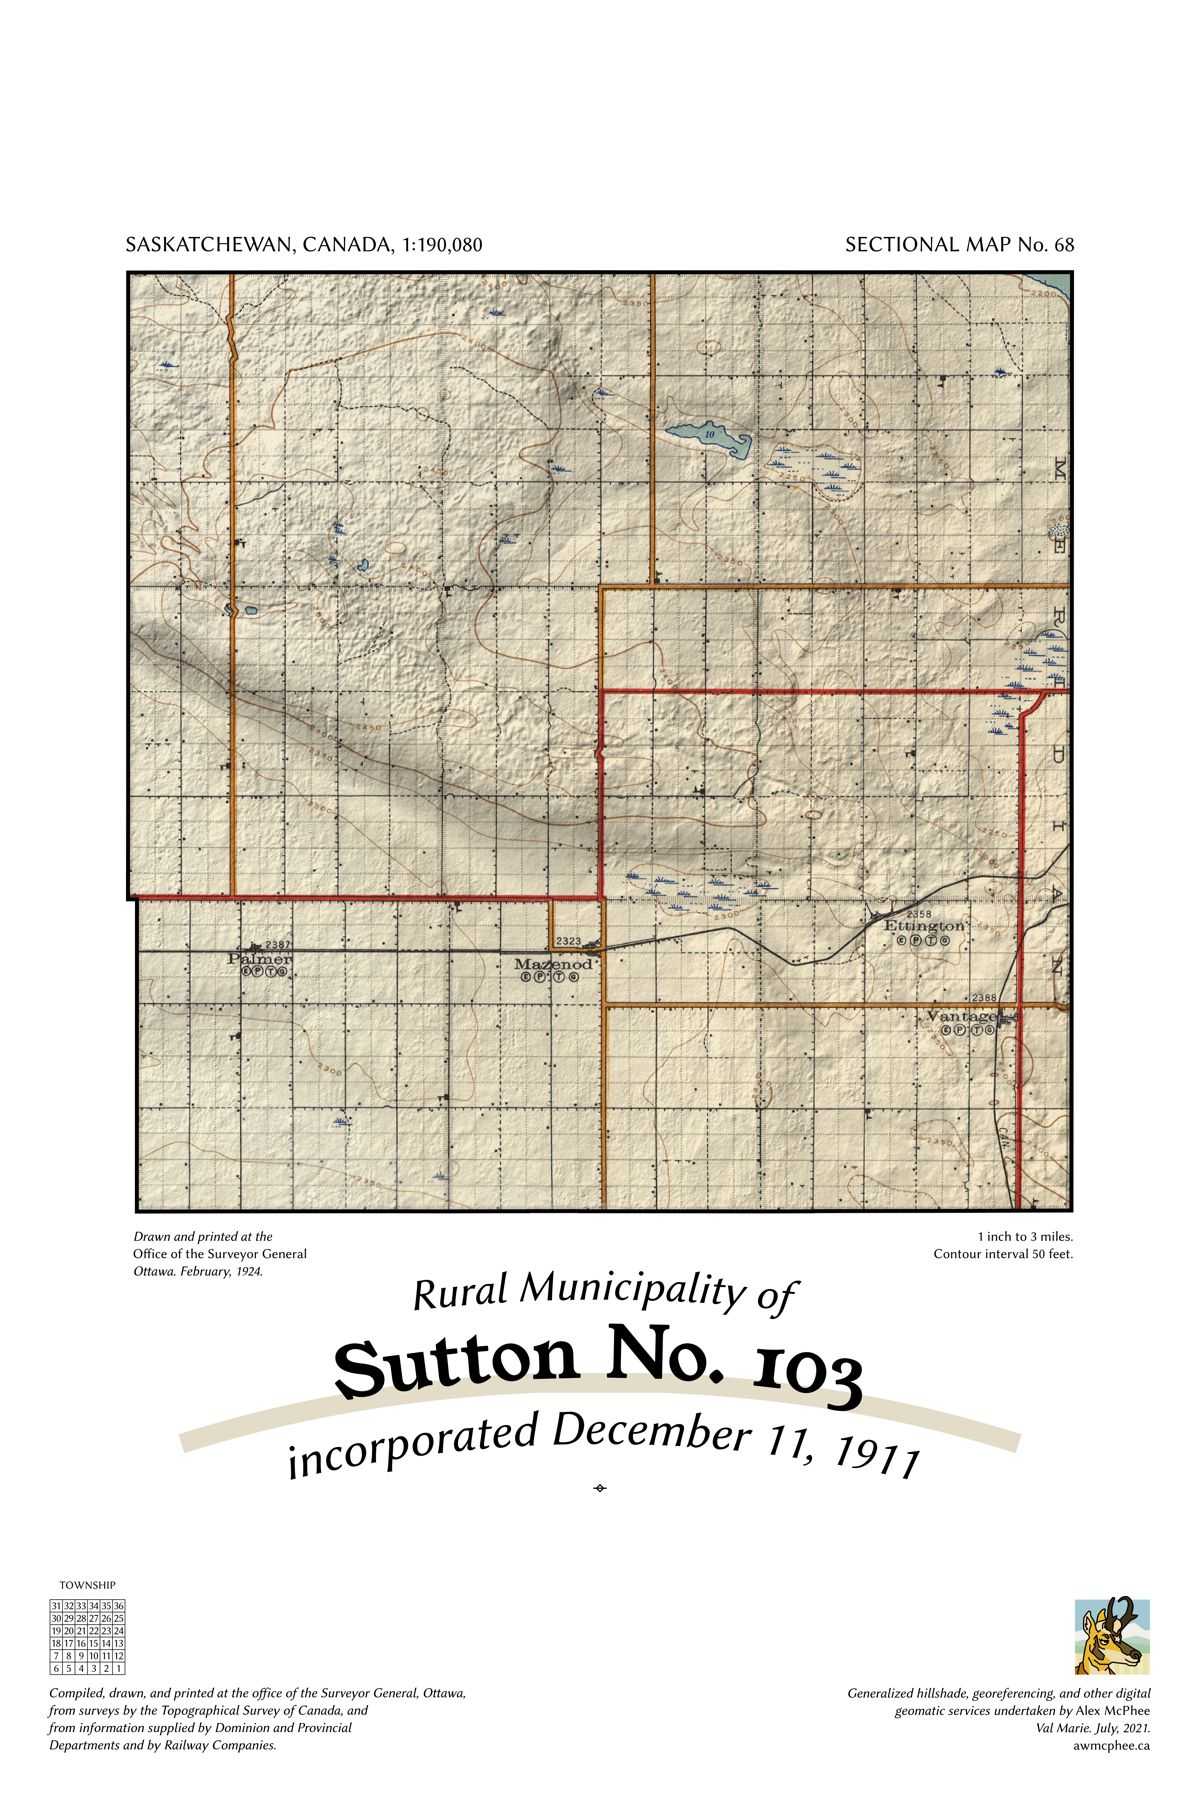 A map of the Rural Municipality of Sutton No. 103.